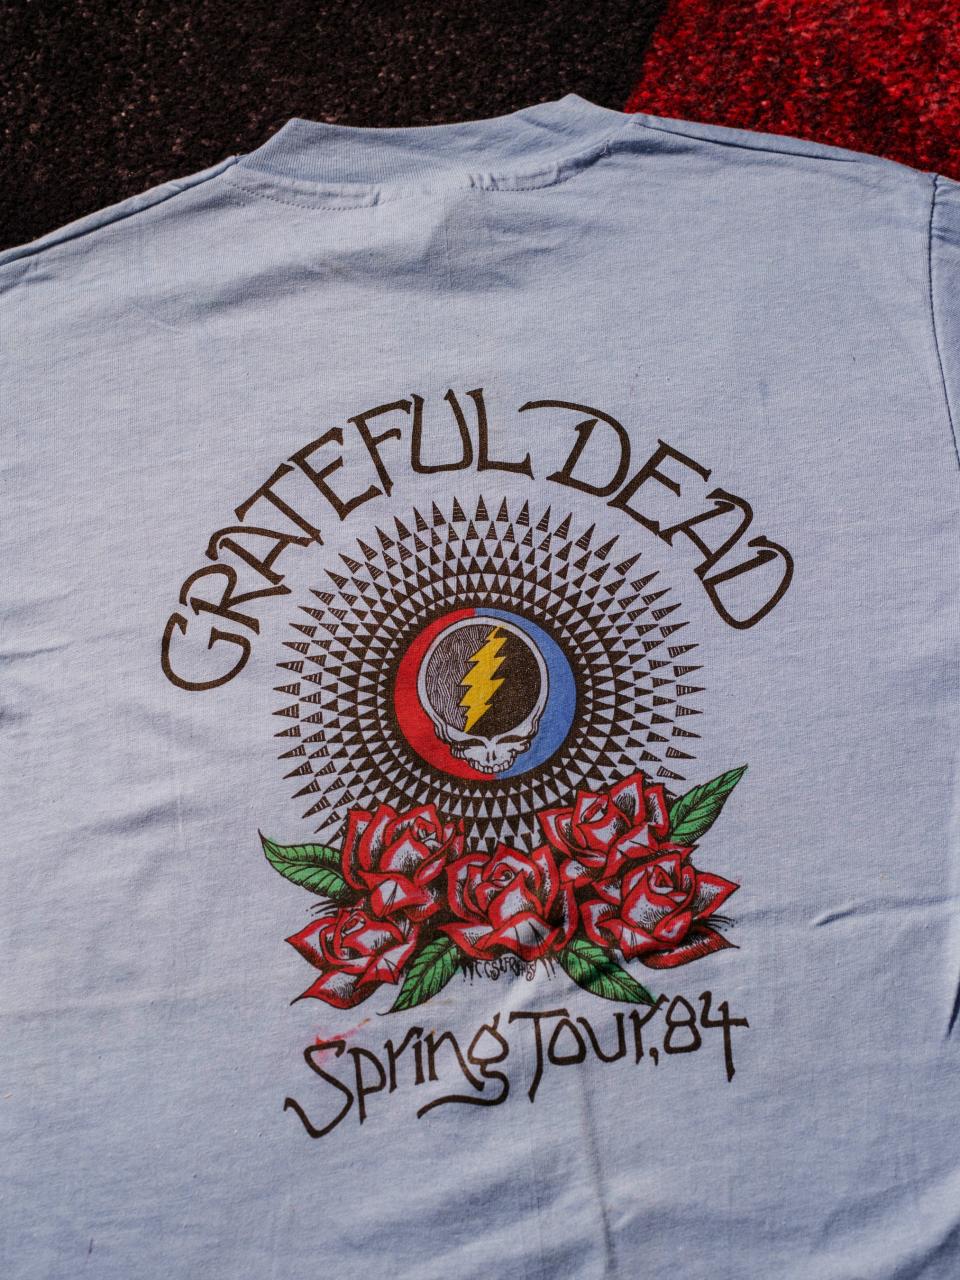 The tee for the band's spring 1984 tour, around the time they scrapped a studio album but continued building an audience on the road.